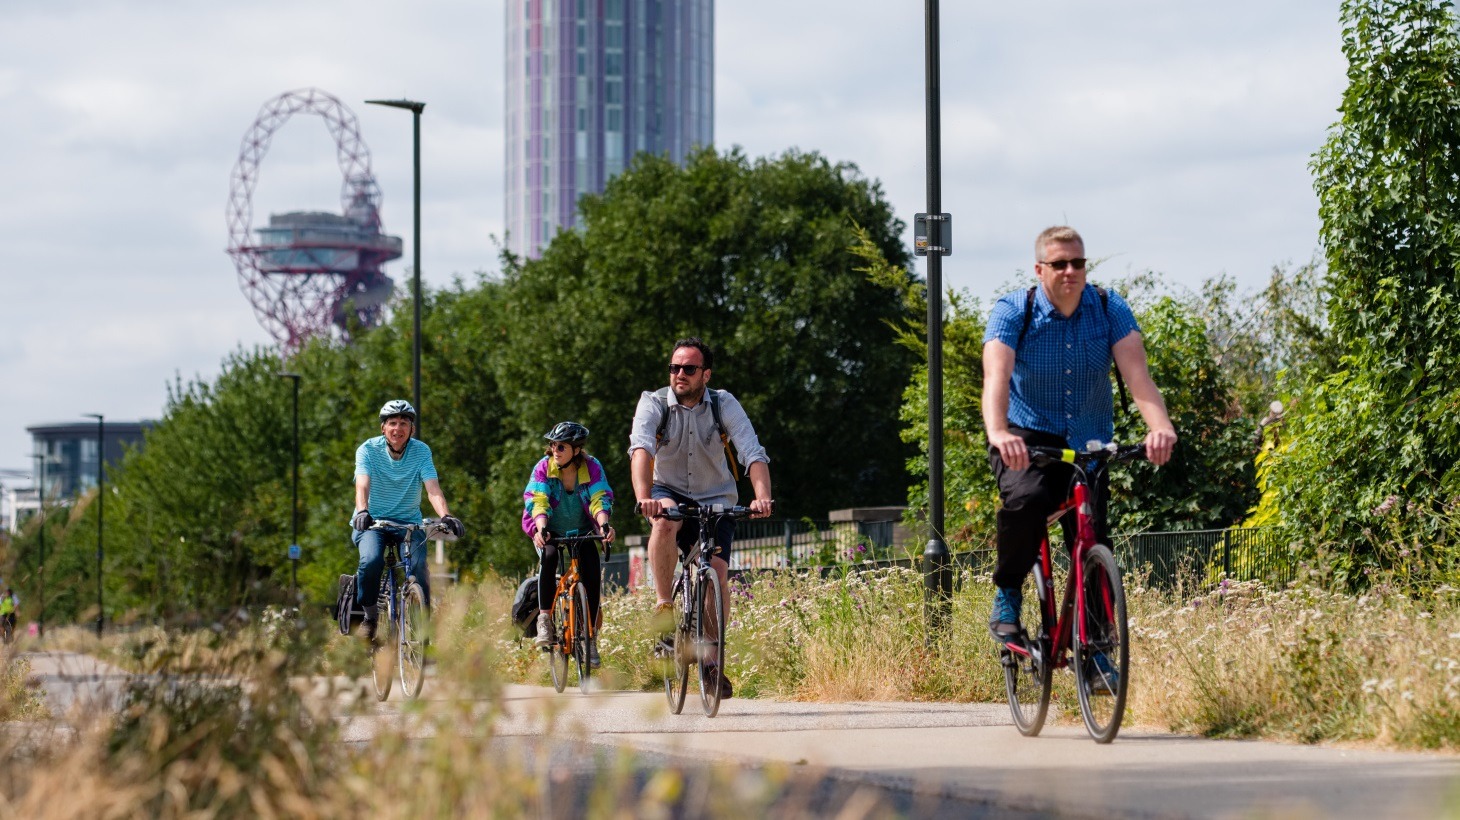 A group of people cycle along a Greenway in London